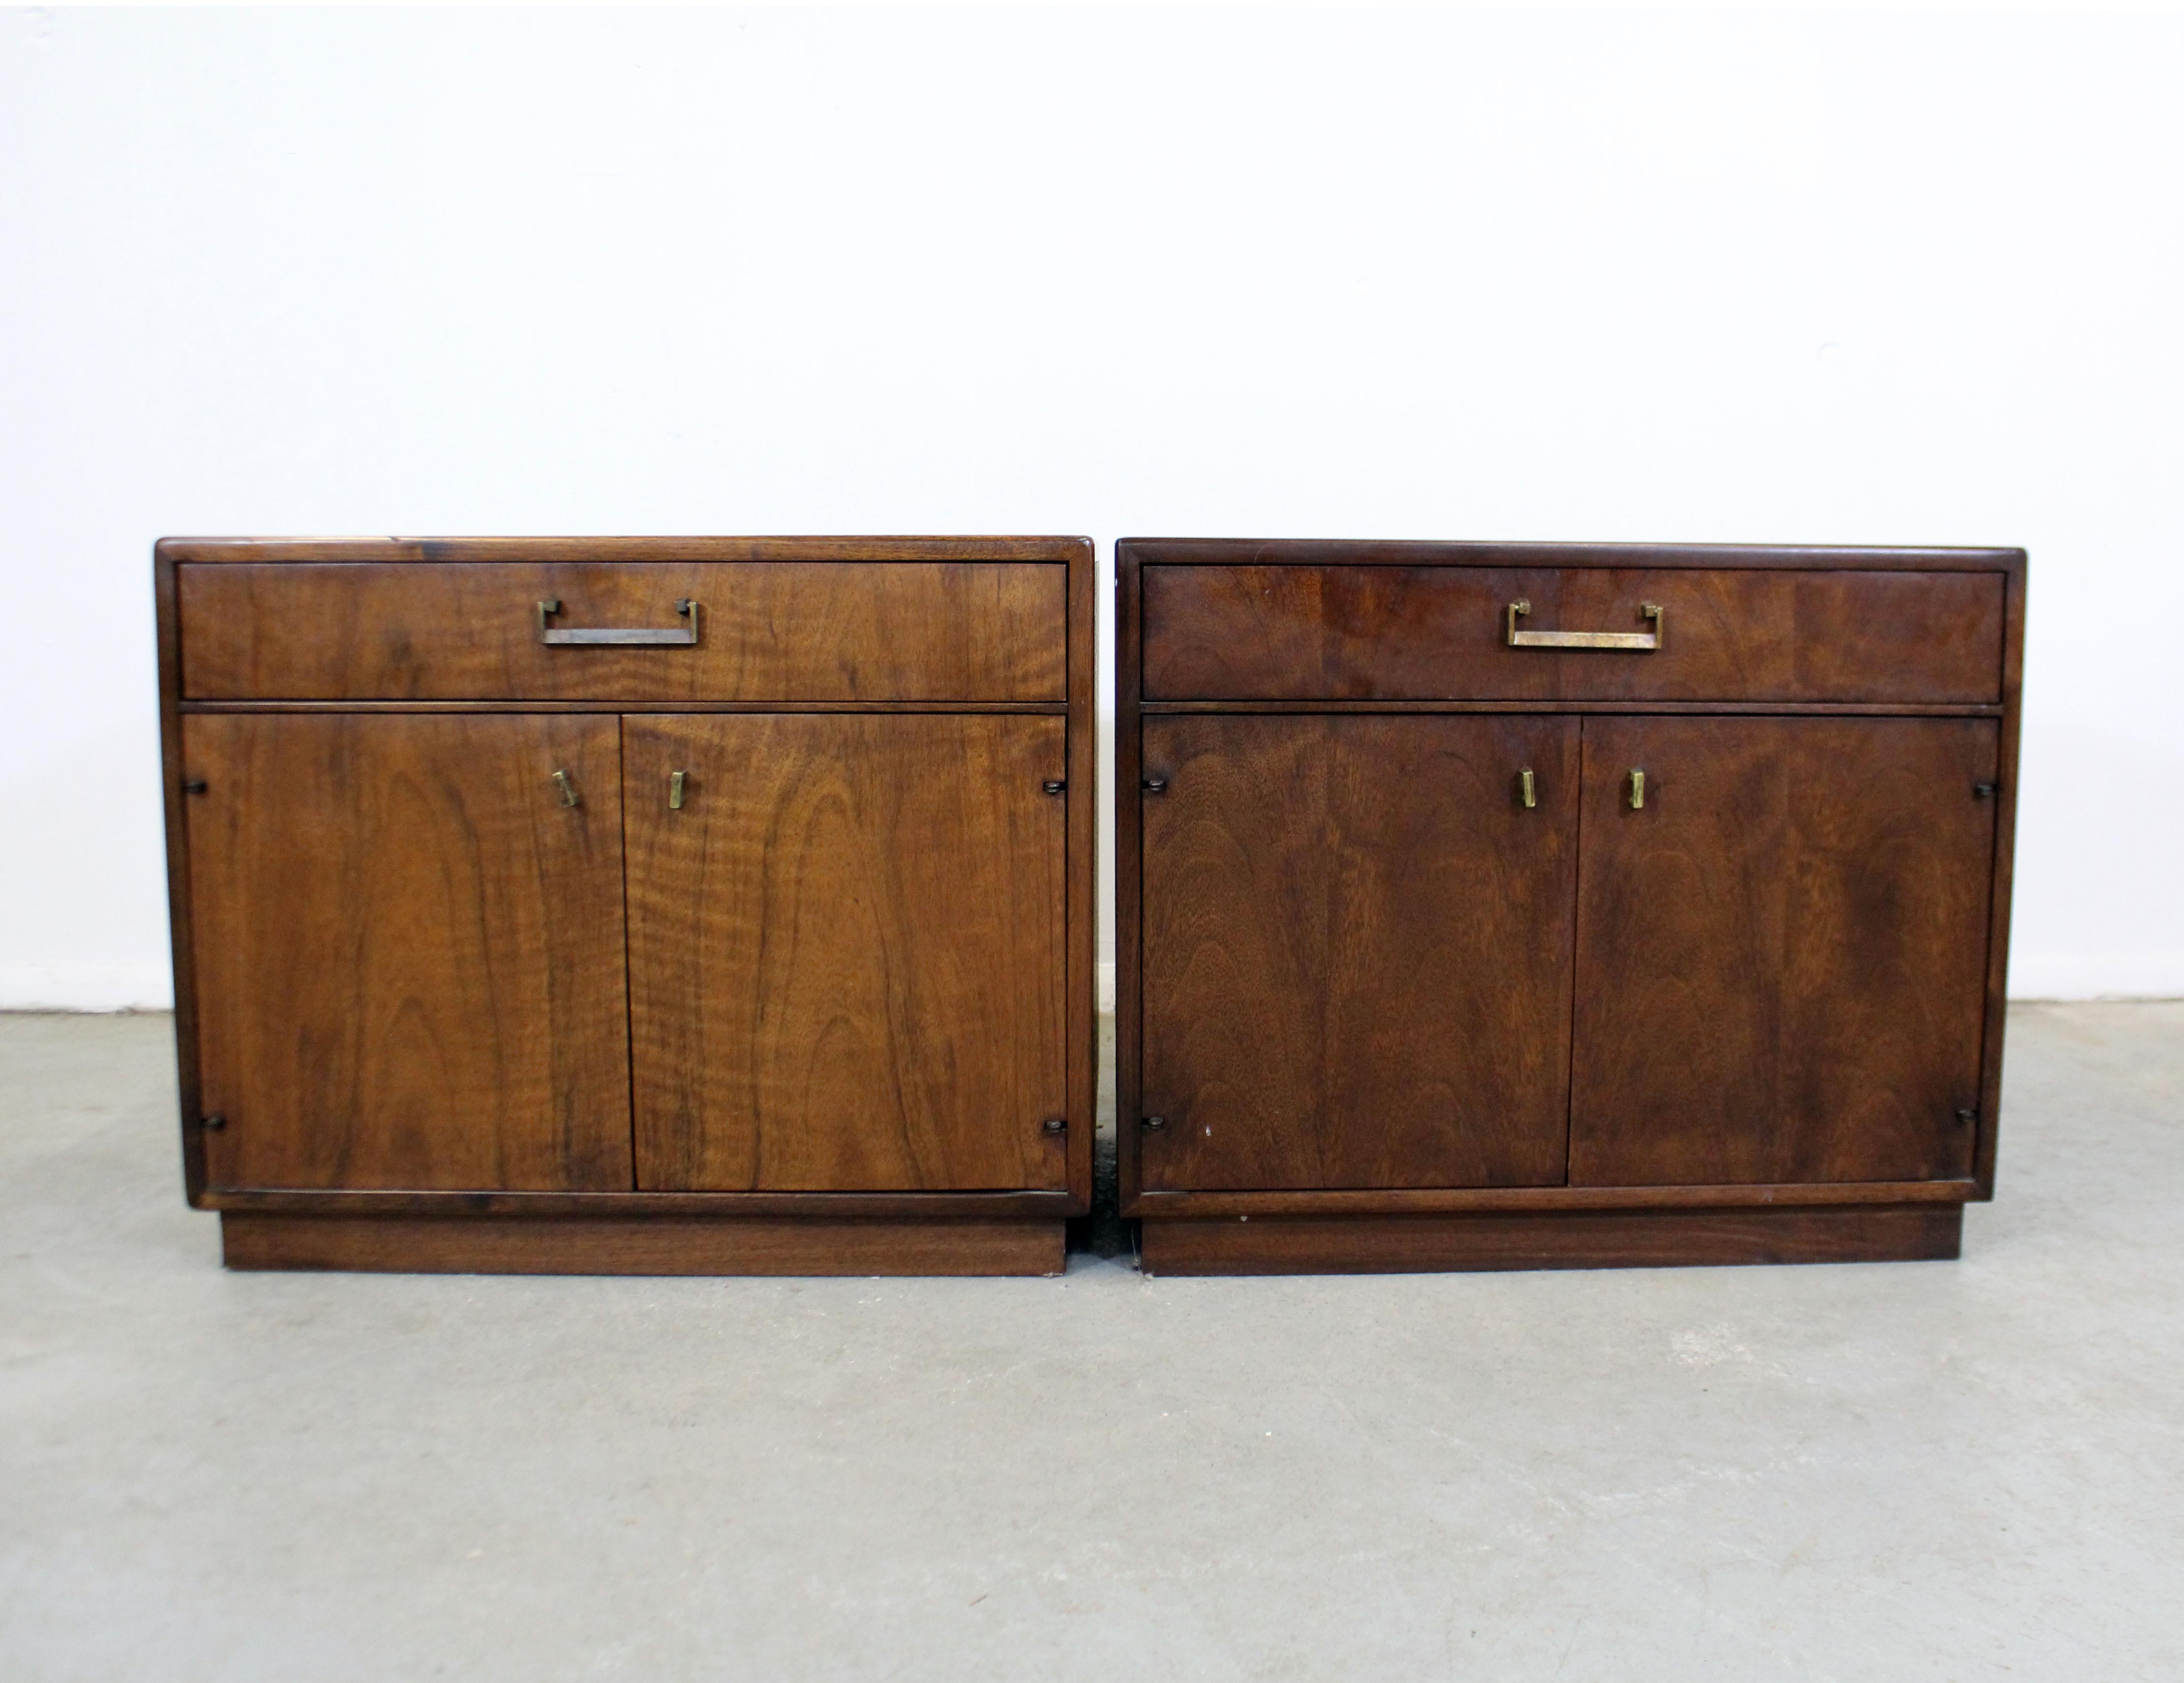 Offered is a pair of Mid-Century Modern nightstands, attributed to Milo Baughman, by founders. They are made of walnut with burl wood-faces and brass pulls. Features 1 single drawer and 2 doors with inner storage. They are in great condition, show